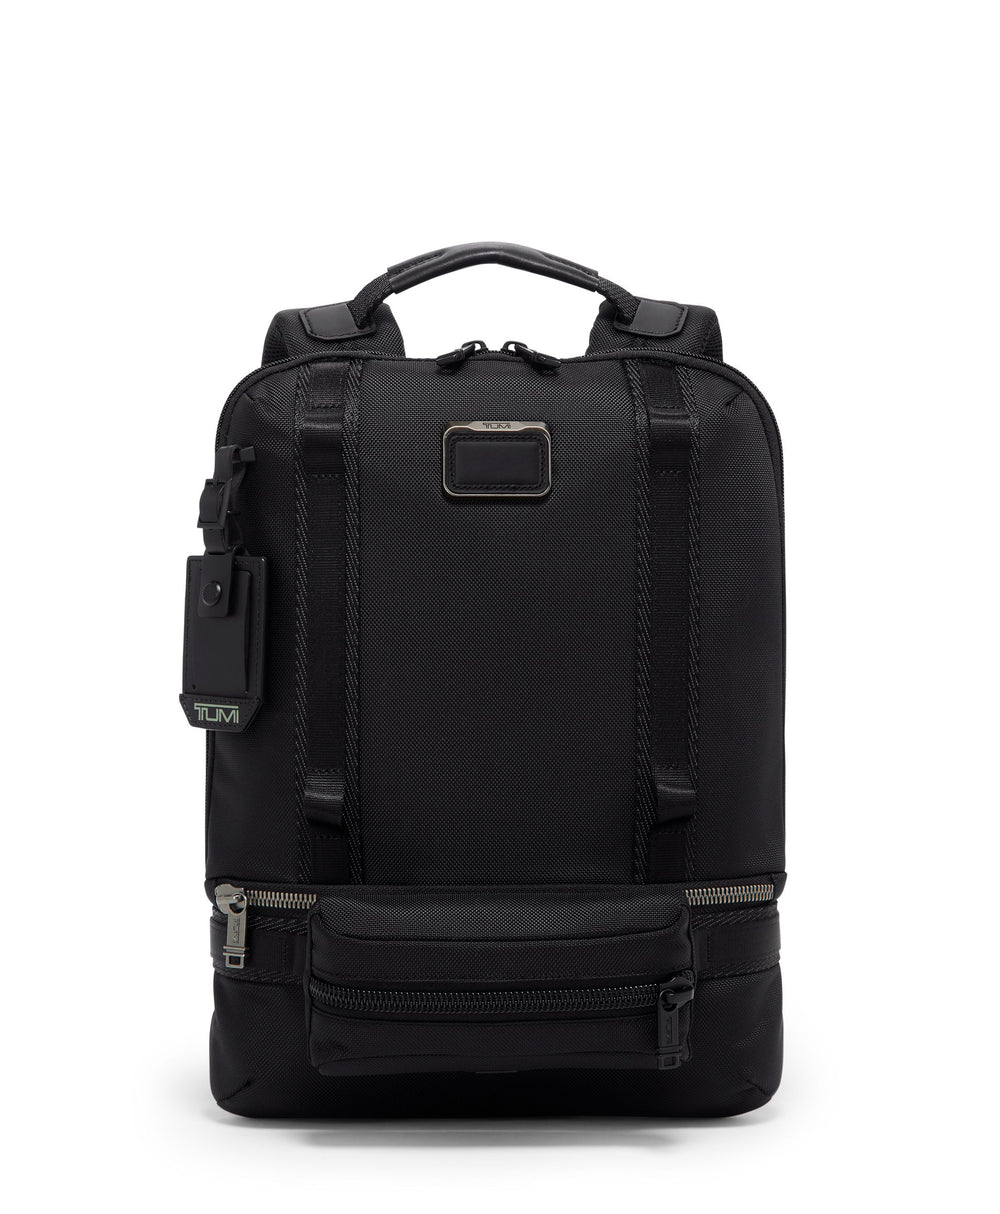 Falcon Tactical Backpack